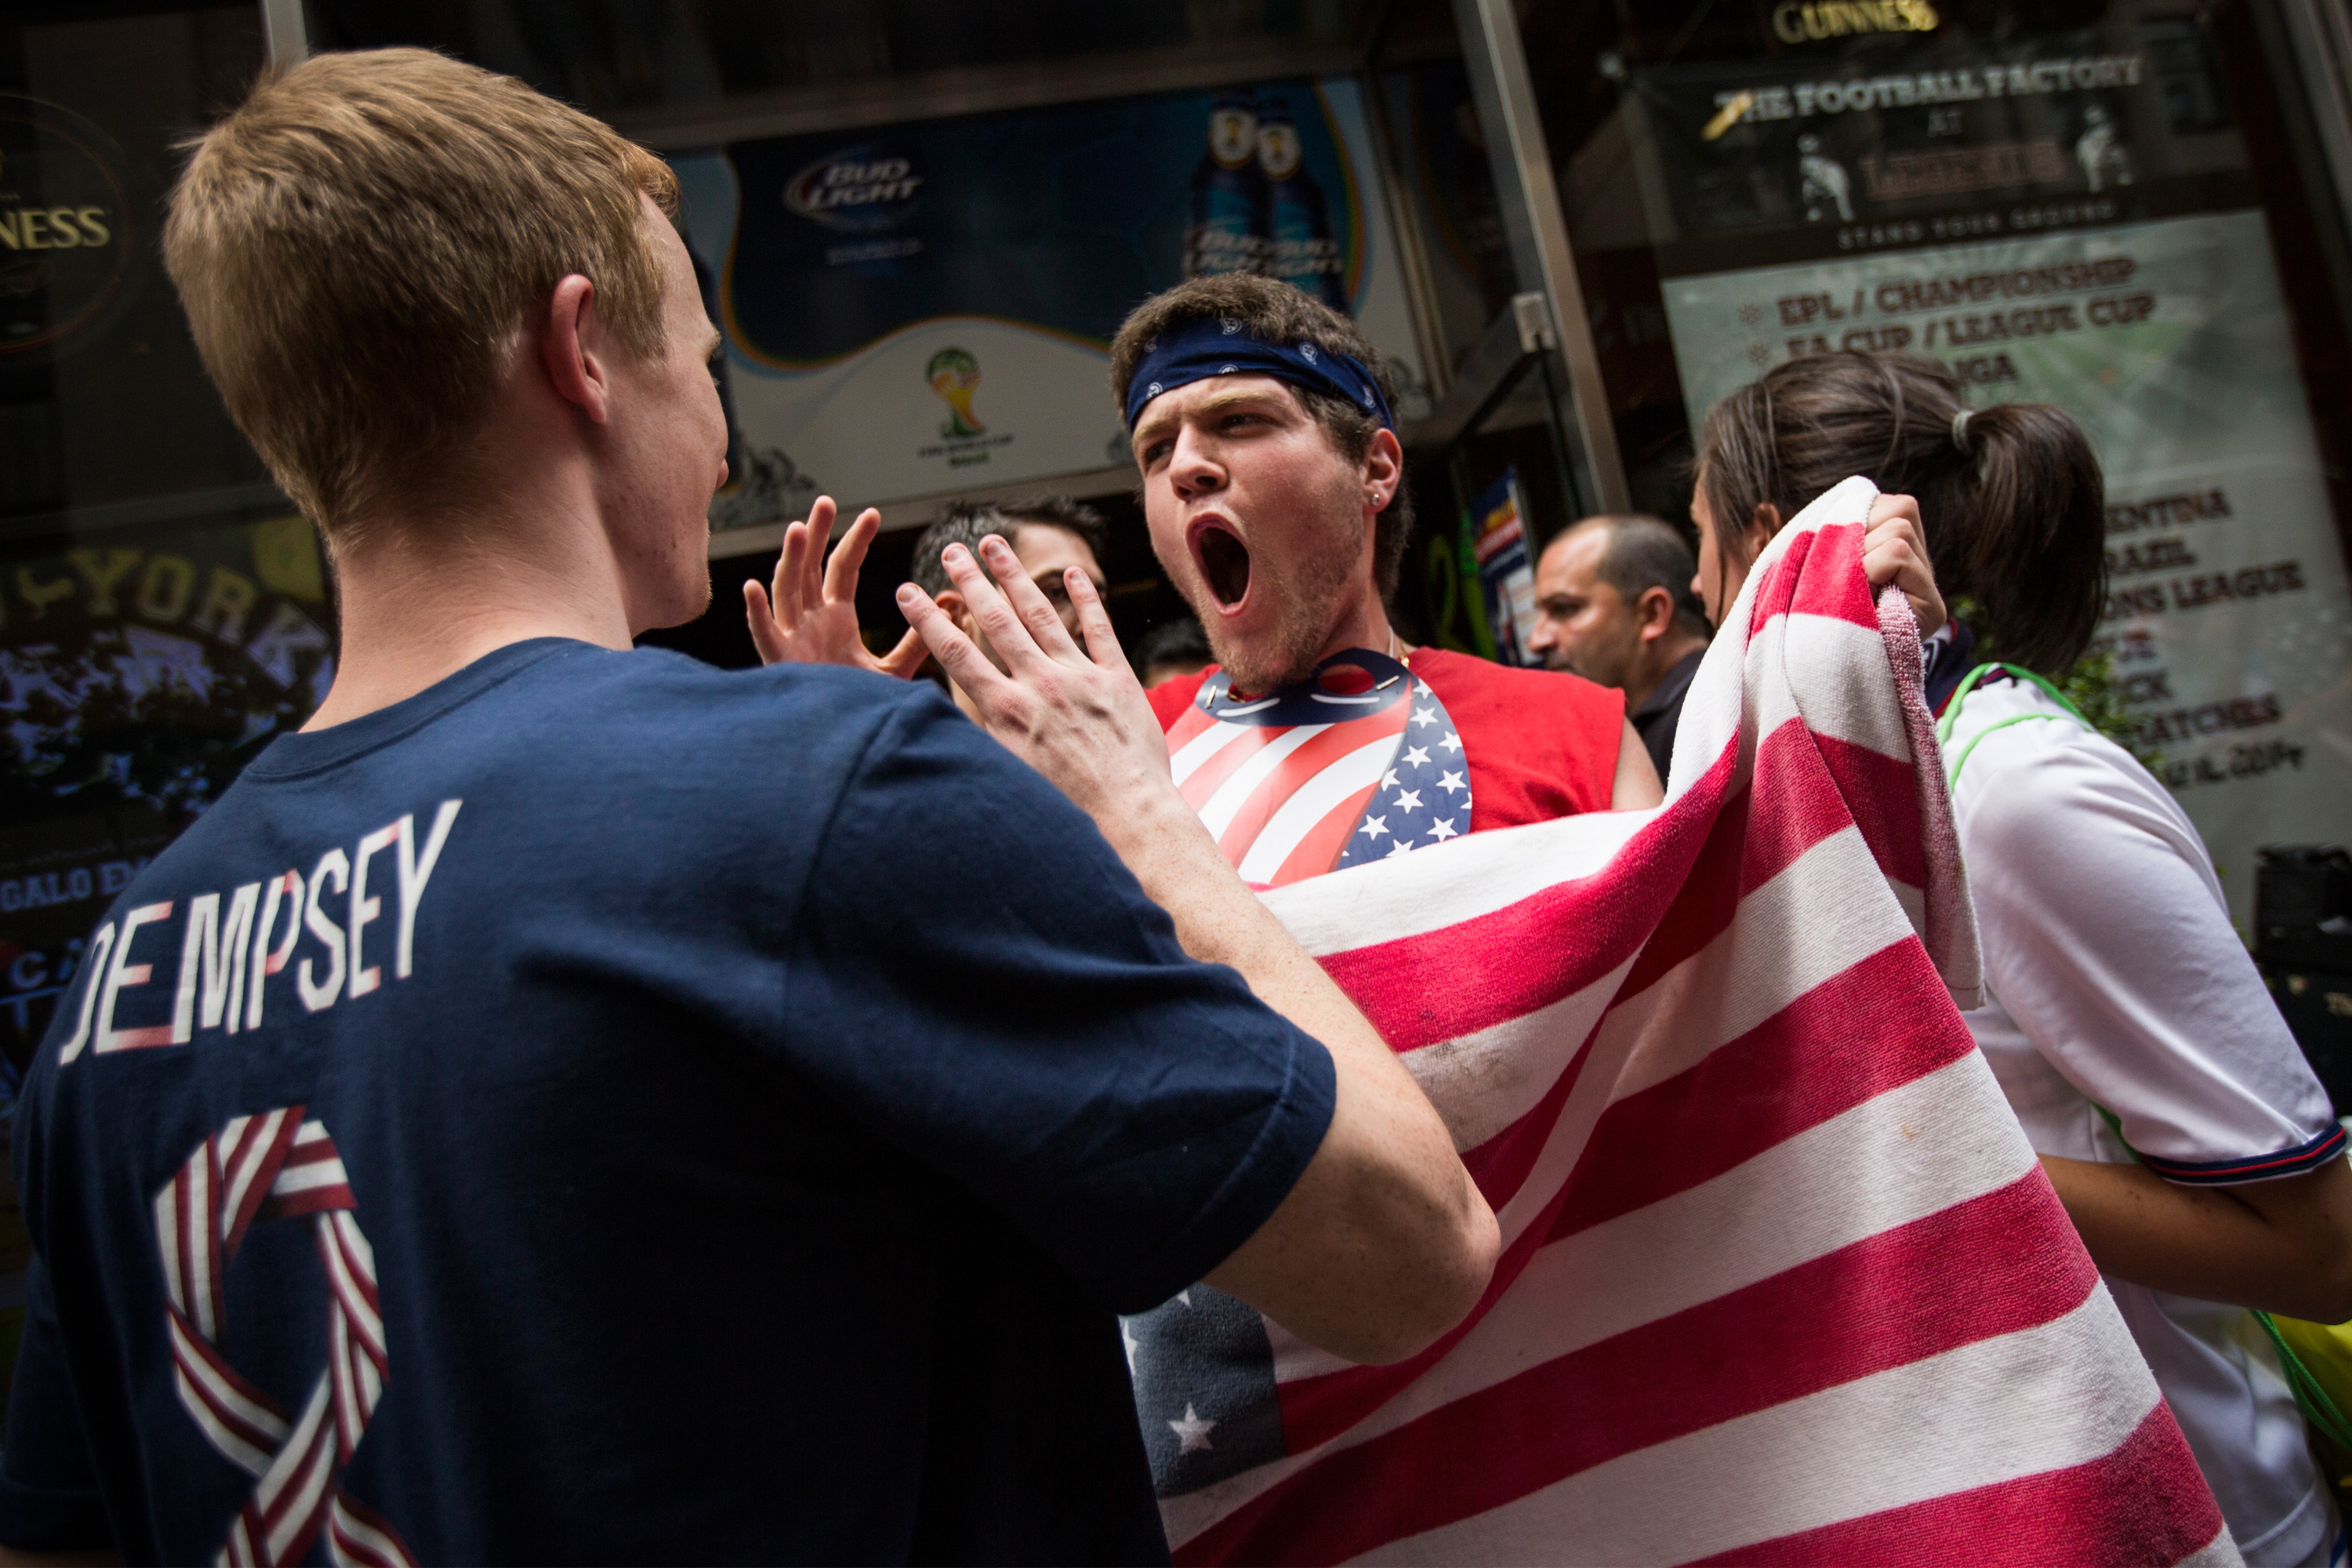 Fans of the United States Men's National Team celebrate while leaving a bar after the Americans advanced to the knockout round of the World Cup on June 26, 2014 in New York City. (Photo by Andrew Burton/Getty Images)